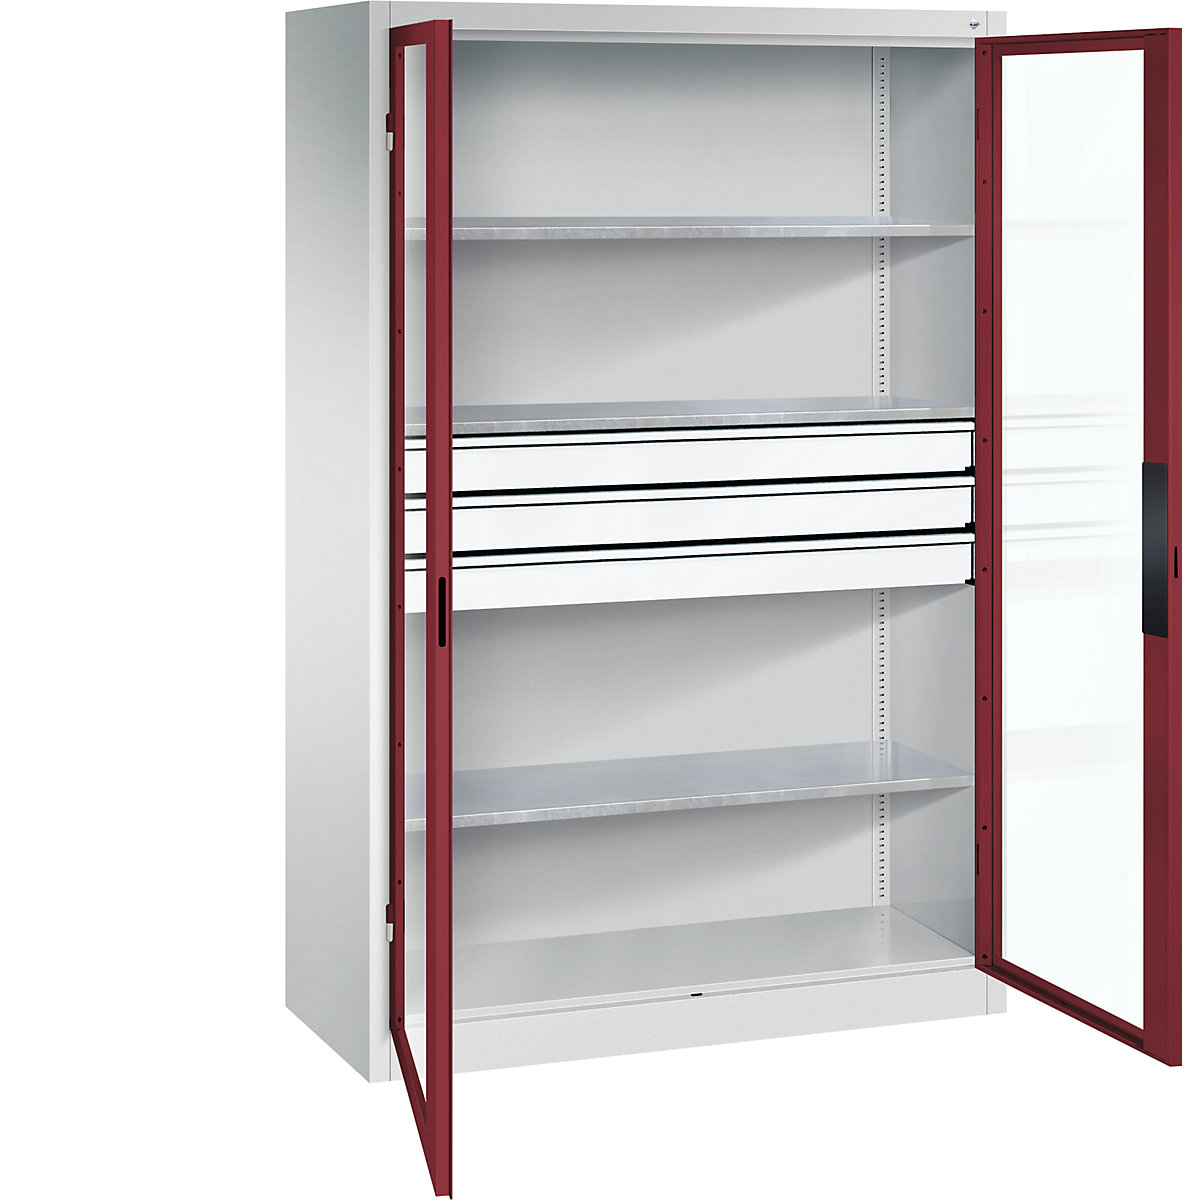 Vision panel double door cupboard – C+P, HxWxD 1950 x 1200 x 500 mm, with 3 shelves, 3 drawers, light grey / ruby red-6